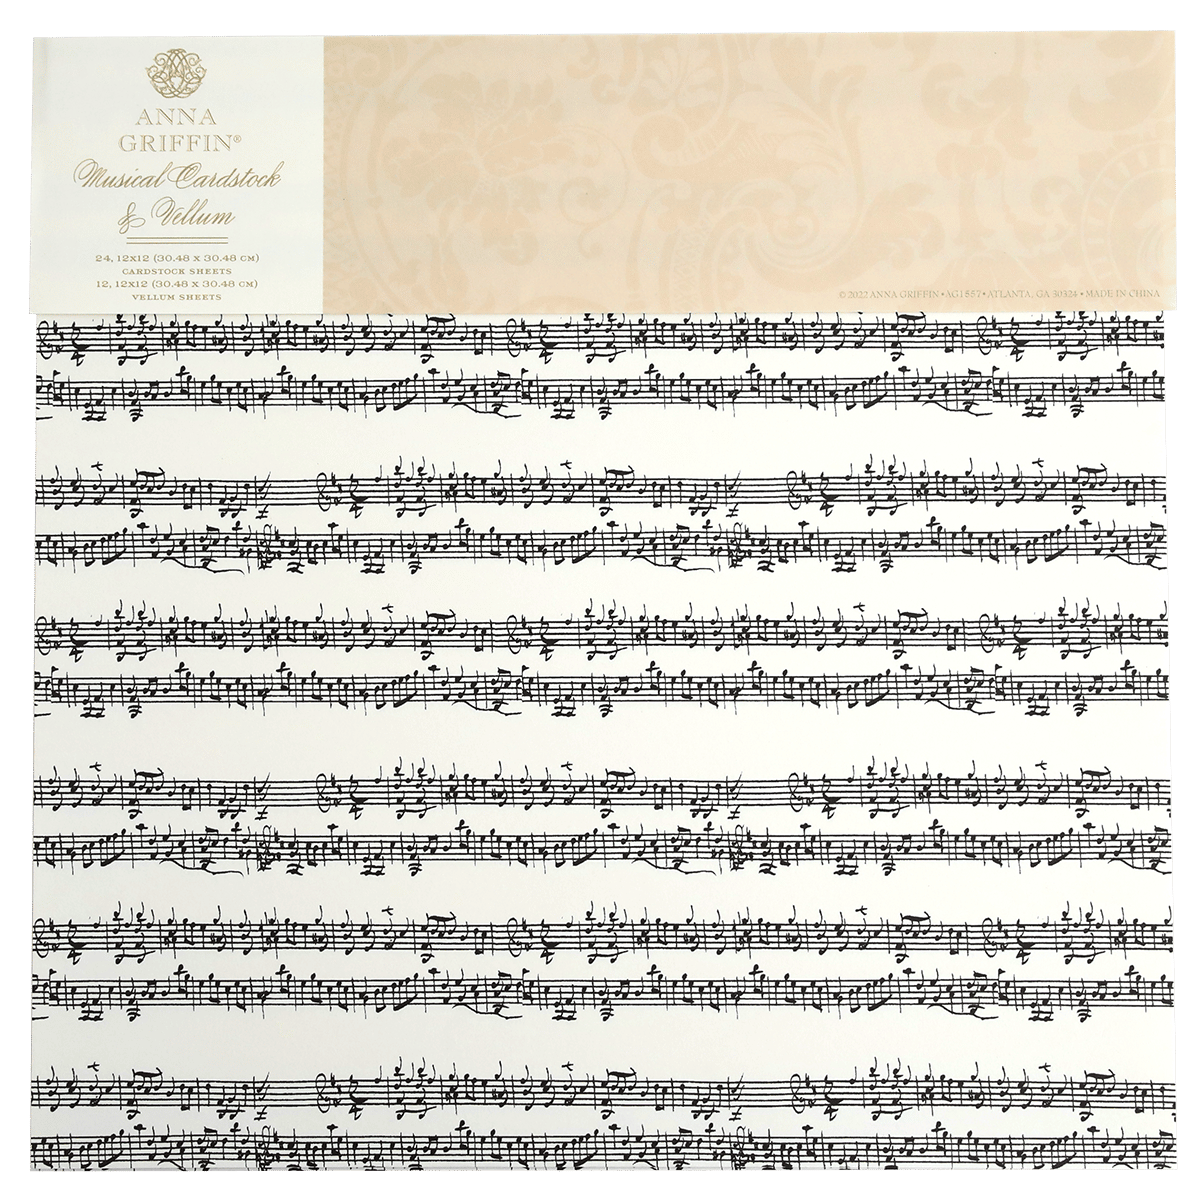 a sheet of music paper with musical notes on it.